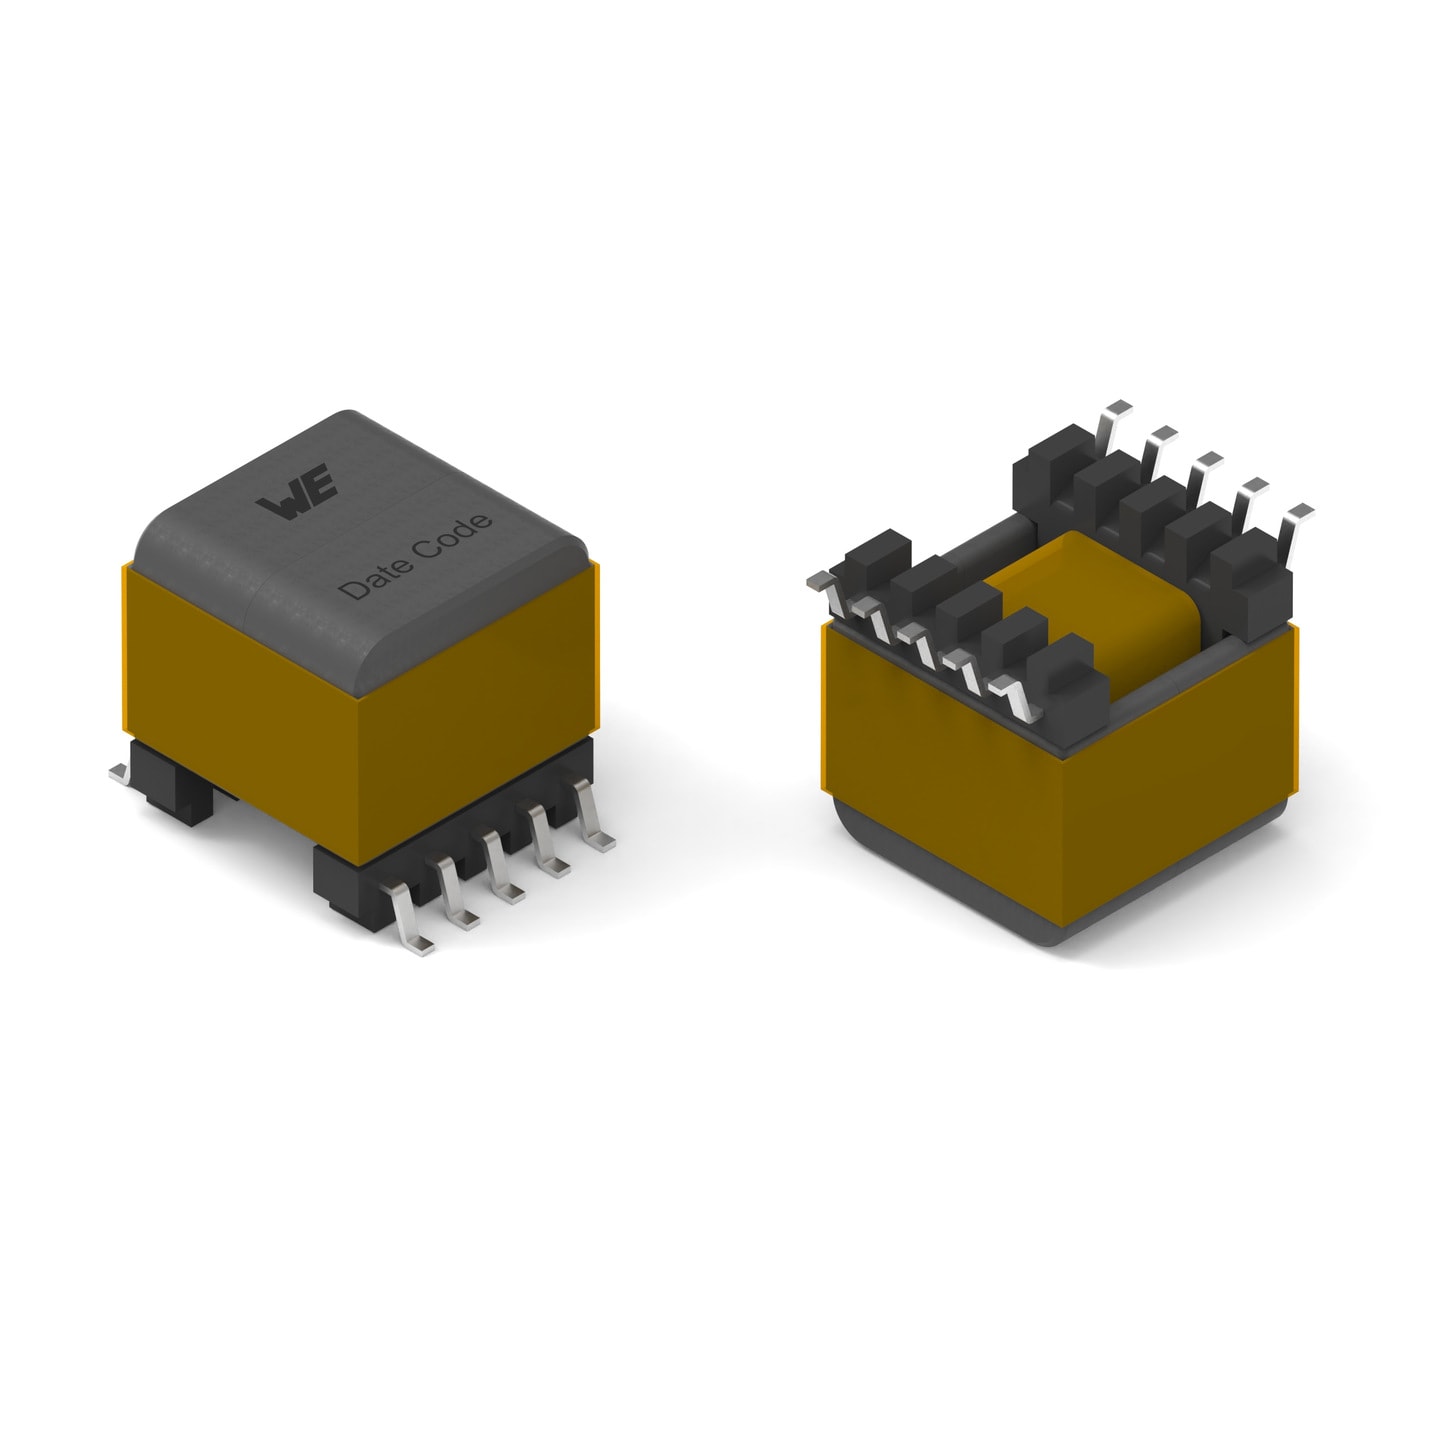 WE-PoEH Power over Ethernet High Power Transformer, Passive Components